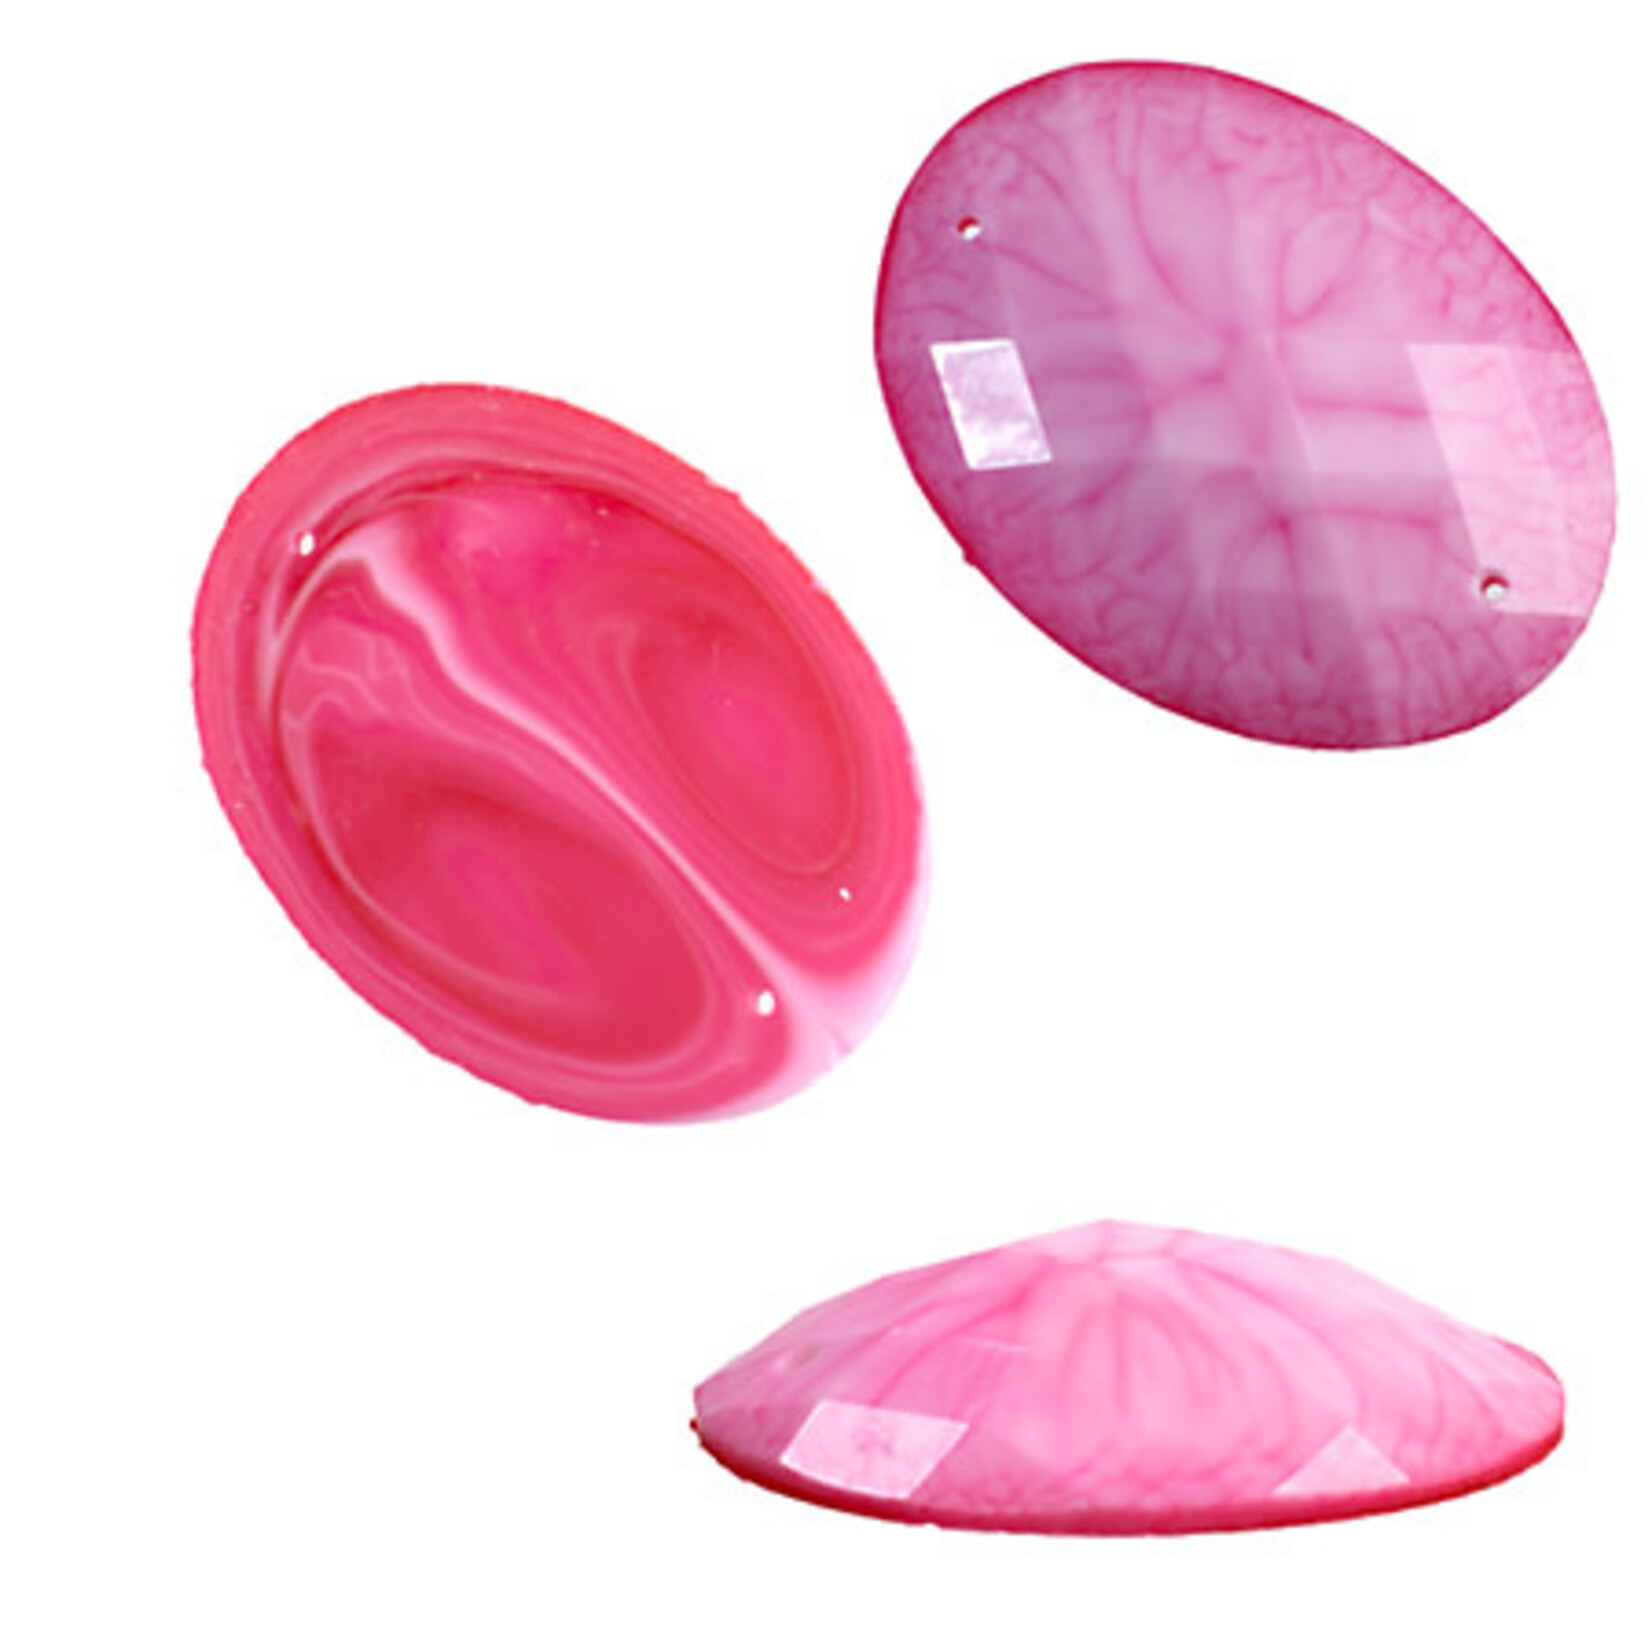 Resin Sew-on Crinkle Stone 30x40mm Oval (10 Pieces)